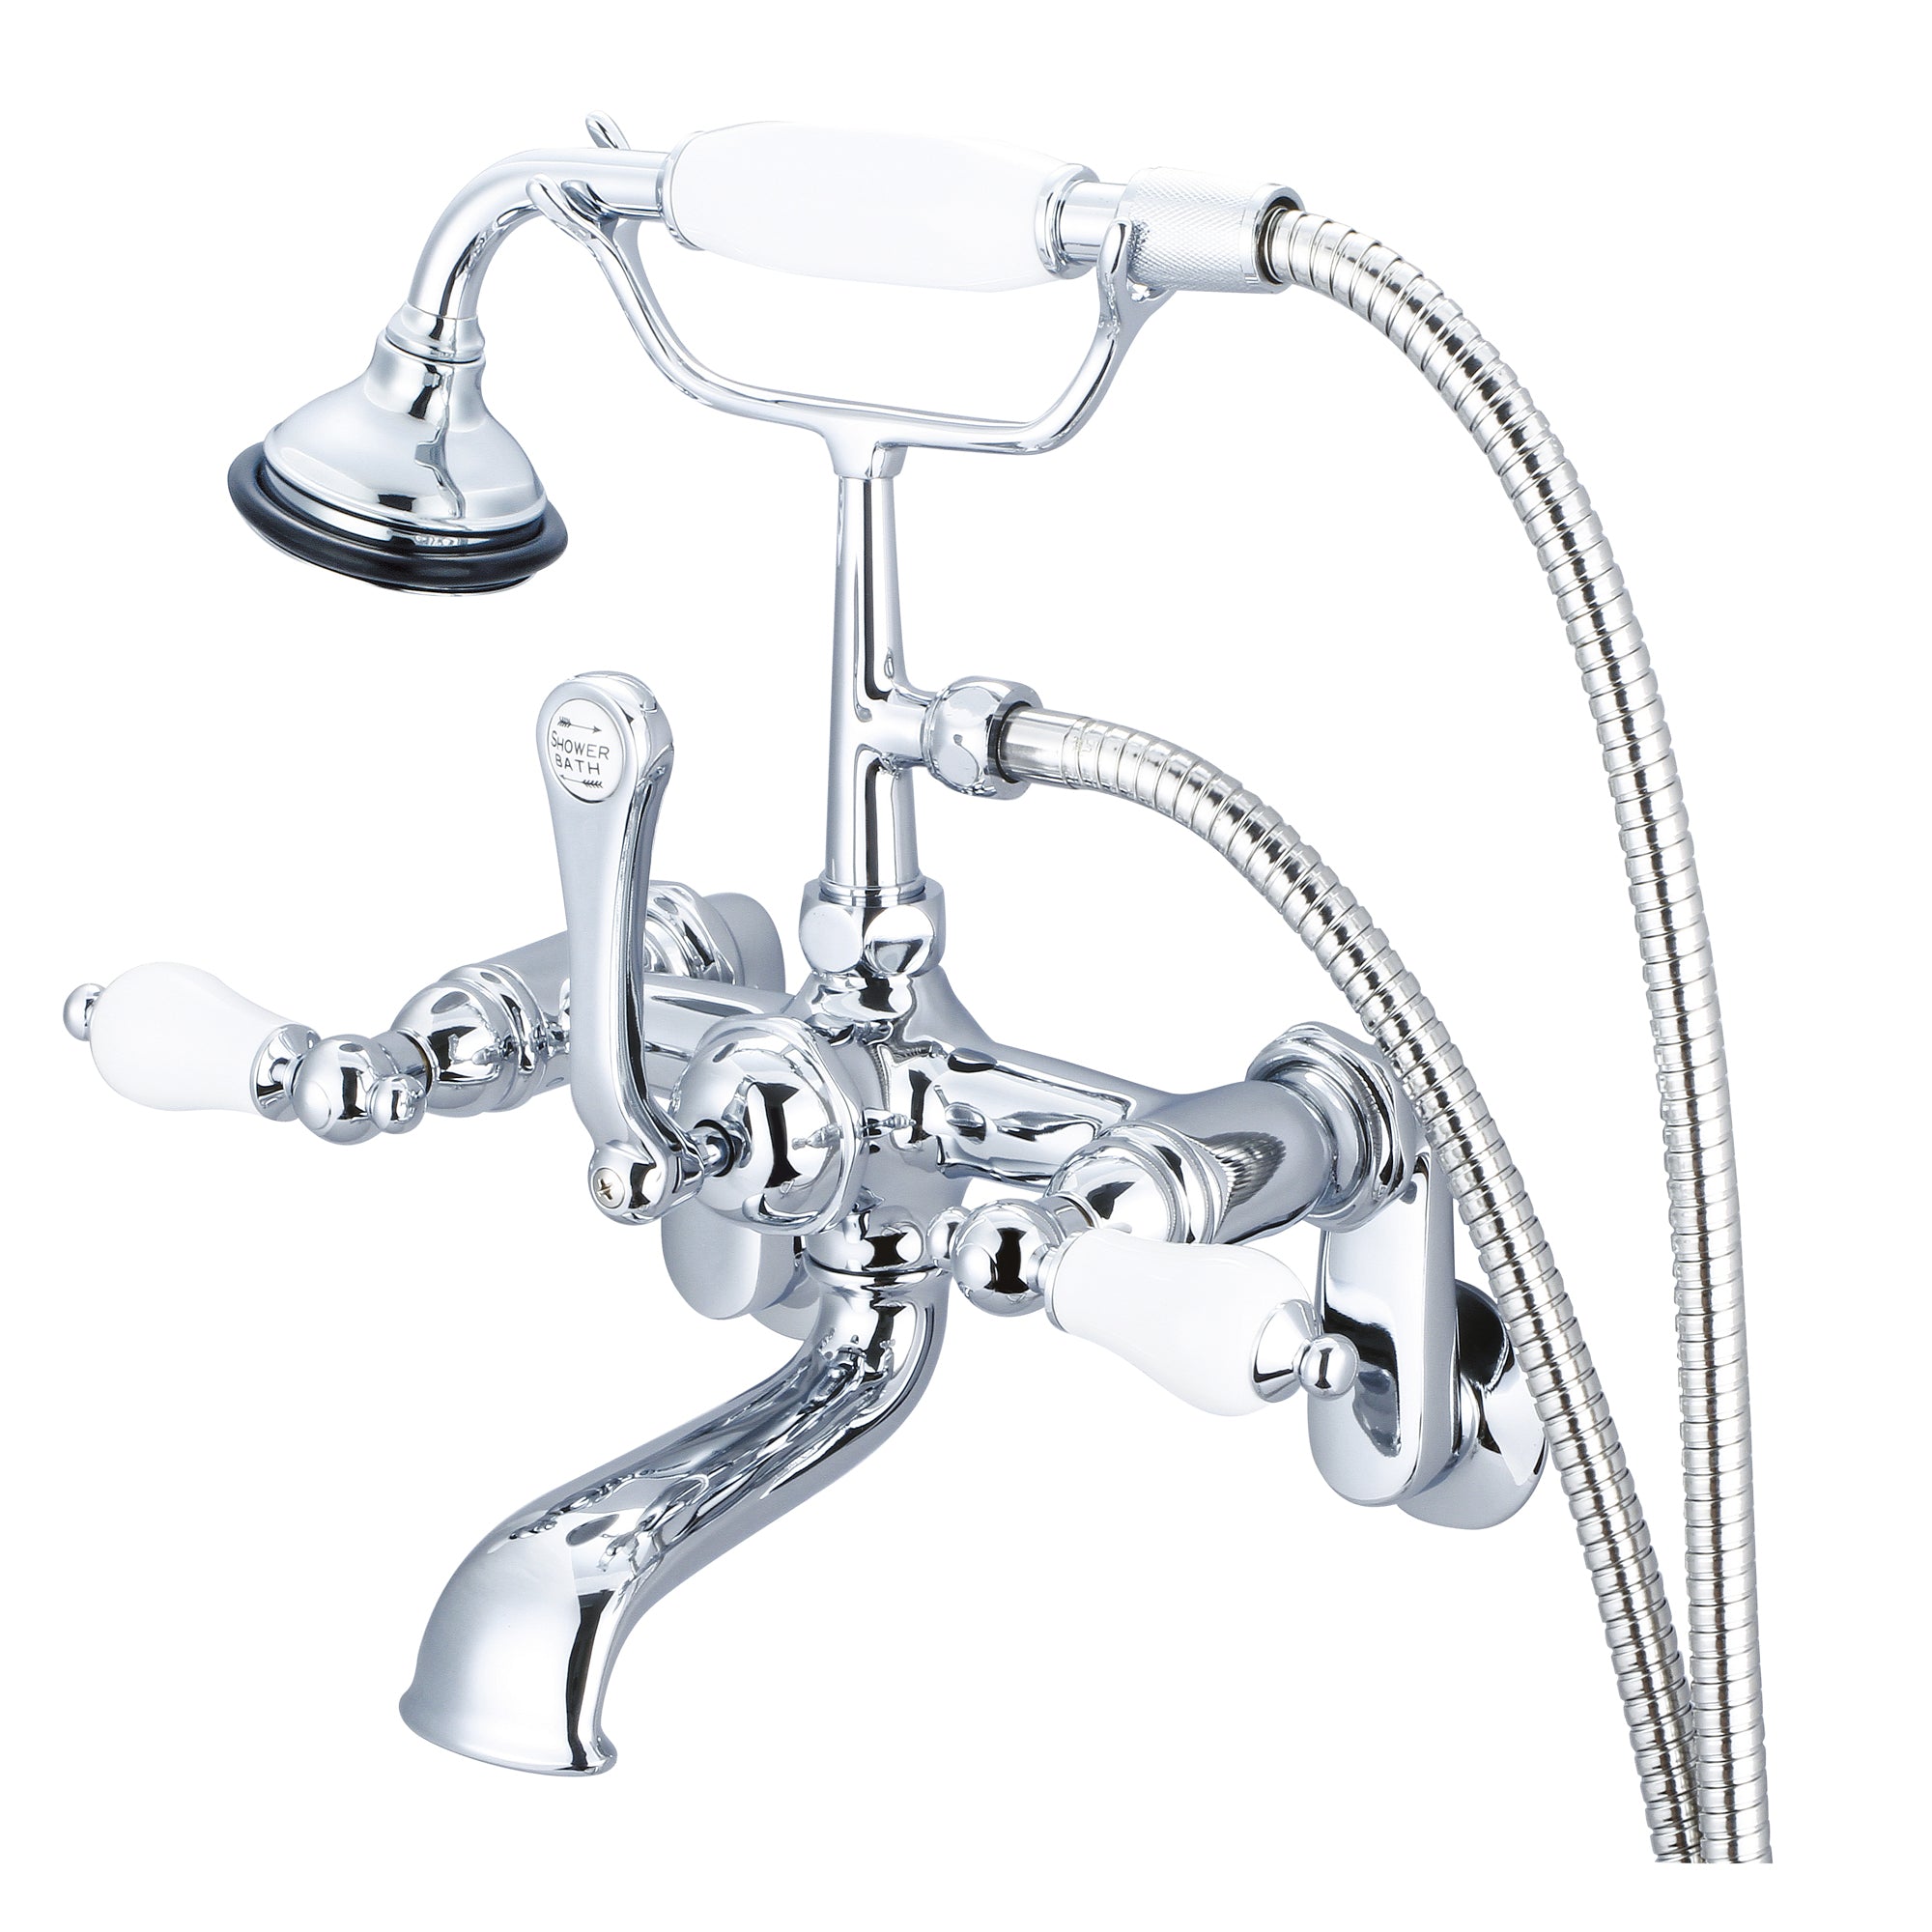 Water Creation | Vintage Classic Adjustable Center Wall Mount Tub Faucet With Swivel Wall Connector & Handheld Shower in Chrome Finish With Porcelain Lever Handles Without labels | F6-0009-01-PL